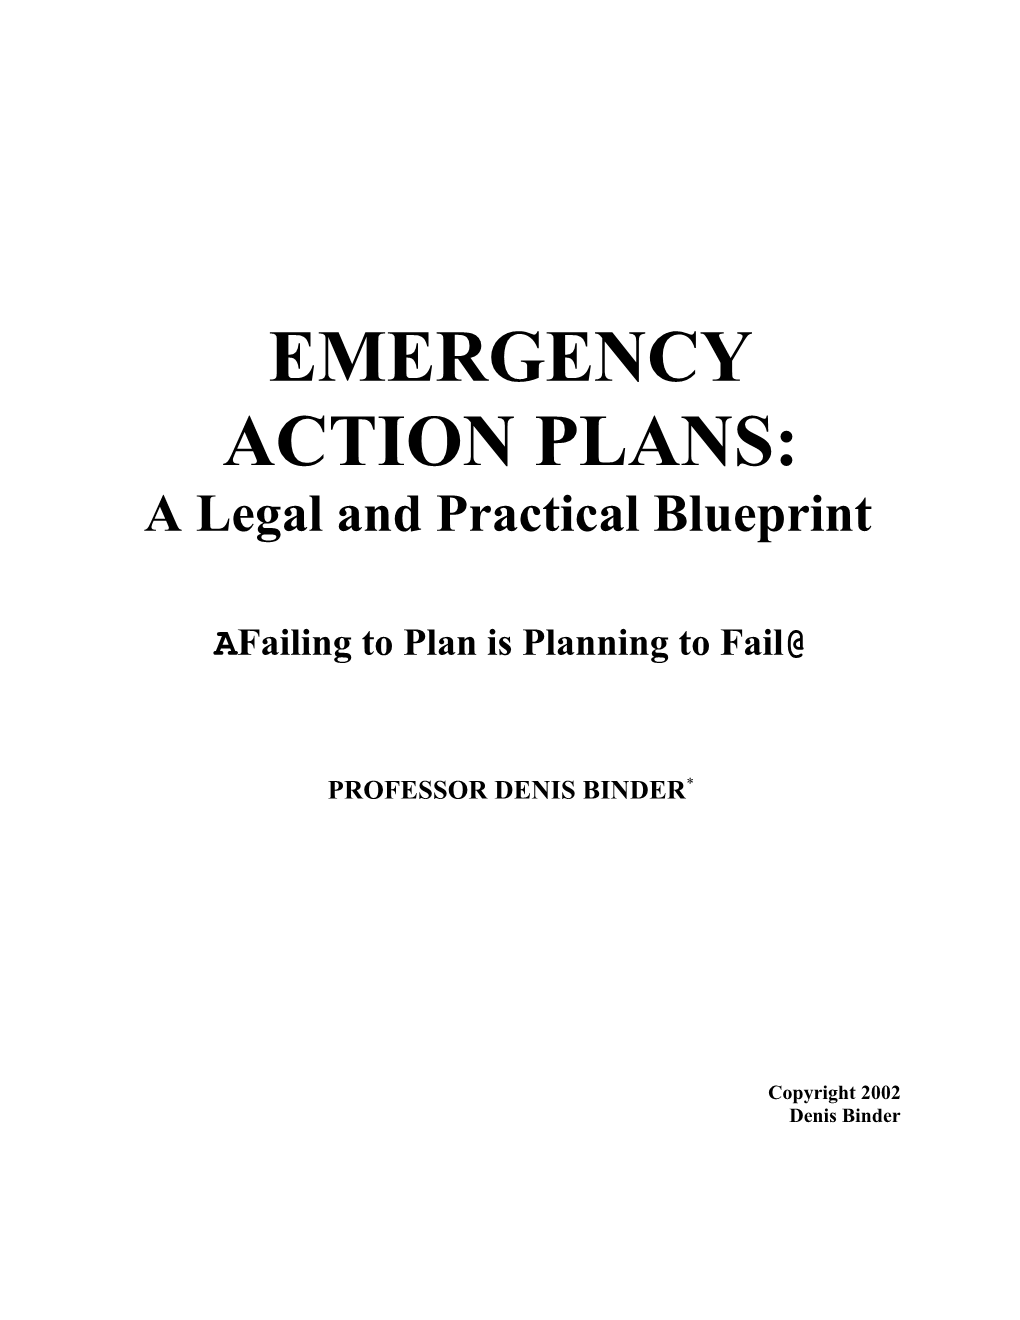 A Legal and Practical Blueprint